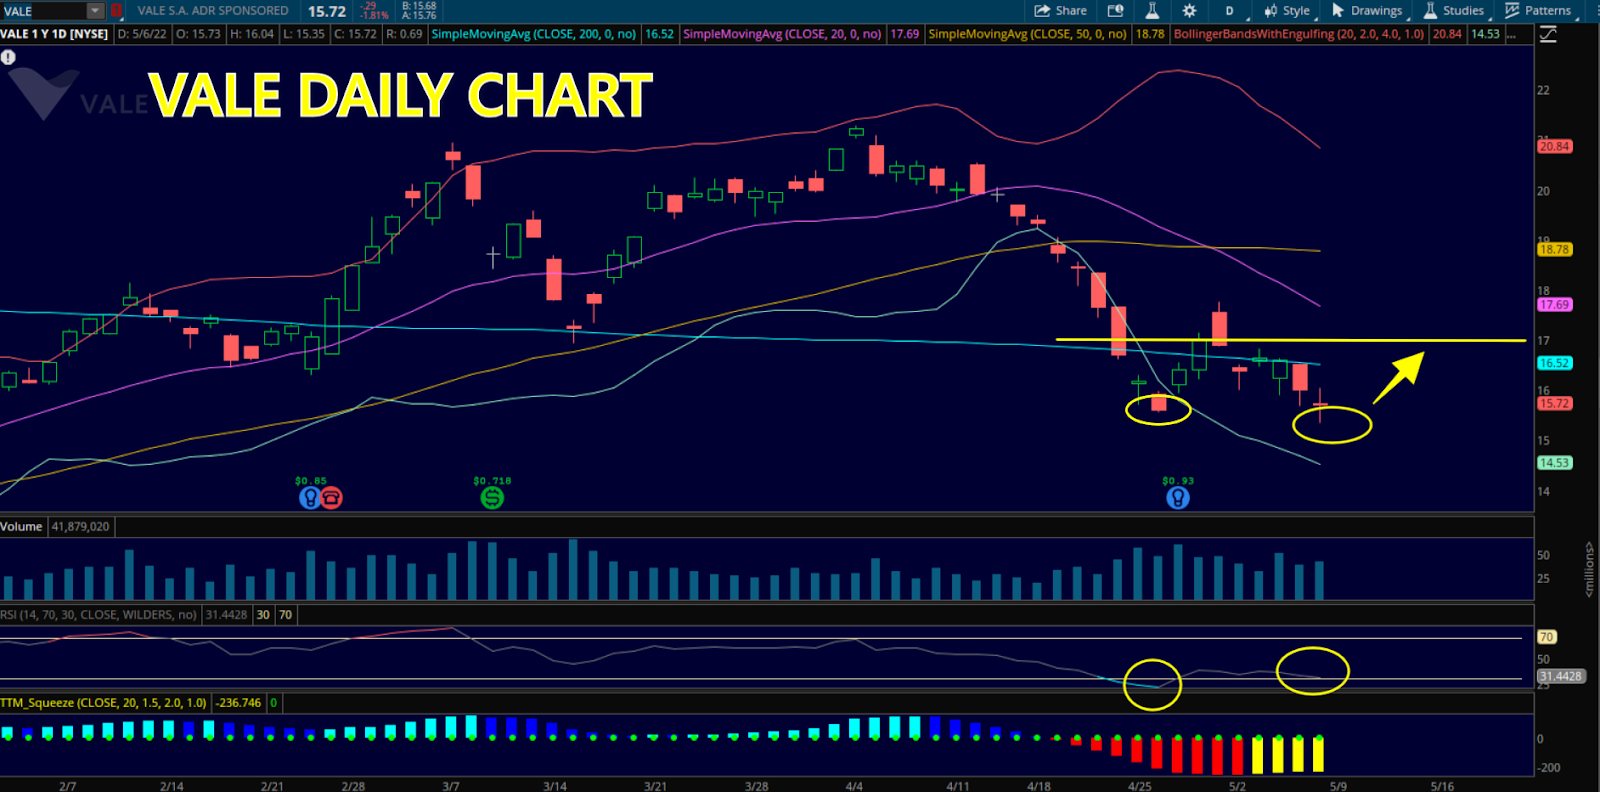 Vale Daily Chart